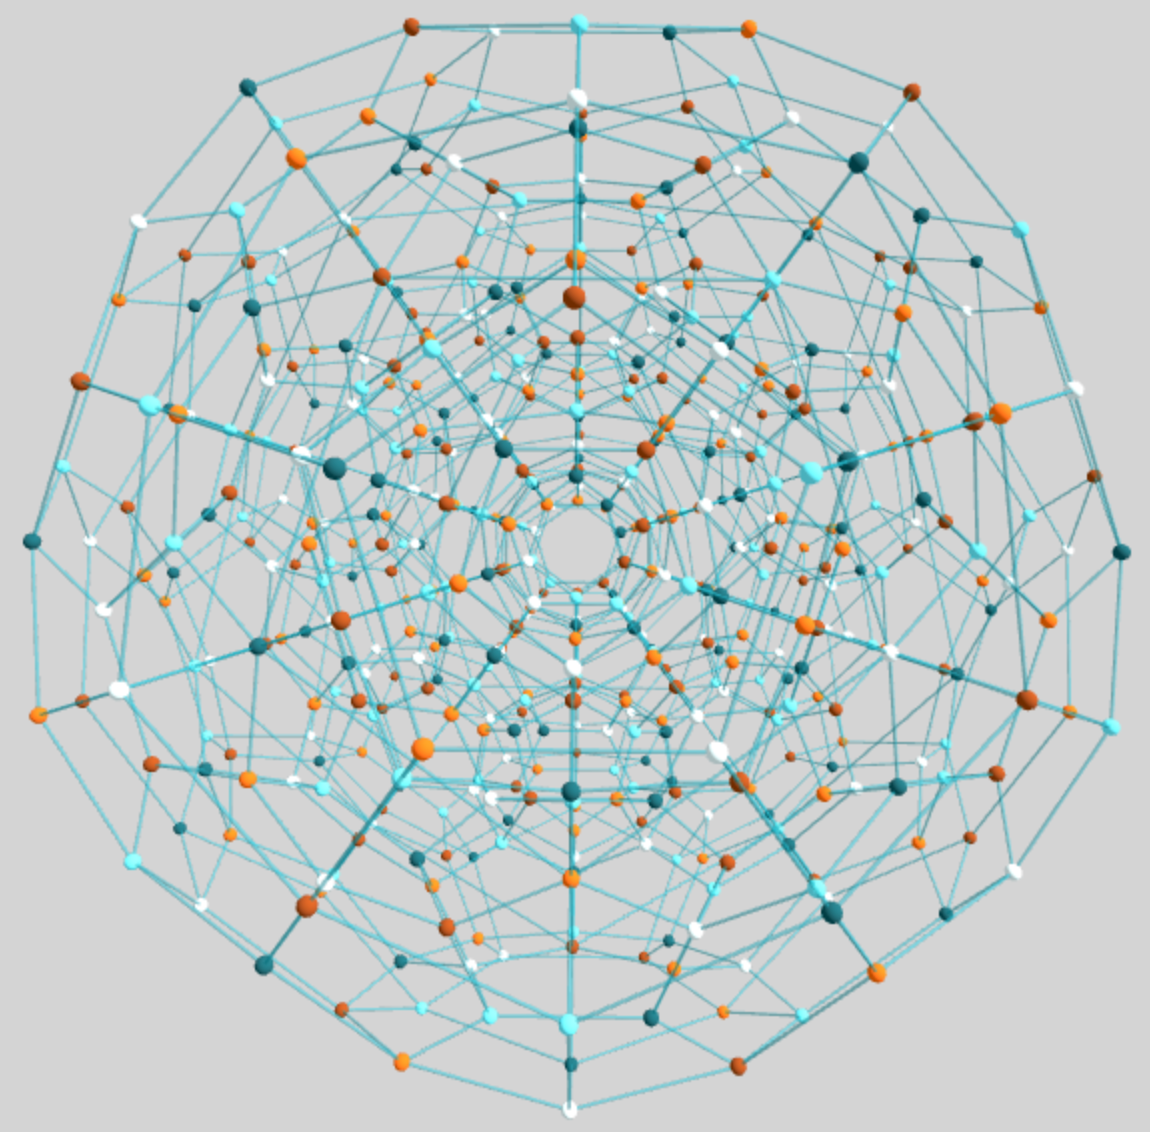 A 3D projection of the 120-cell with its vertices coloured